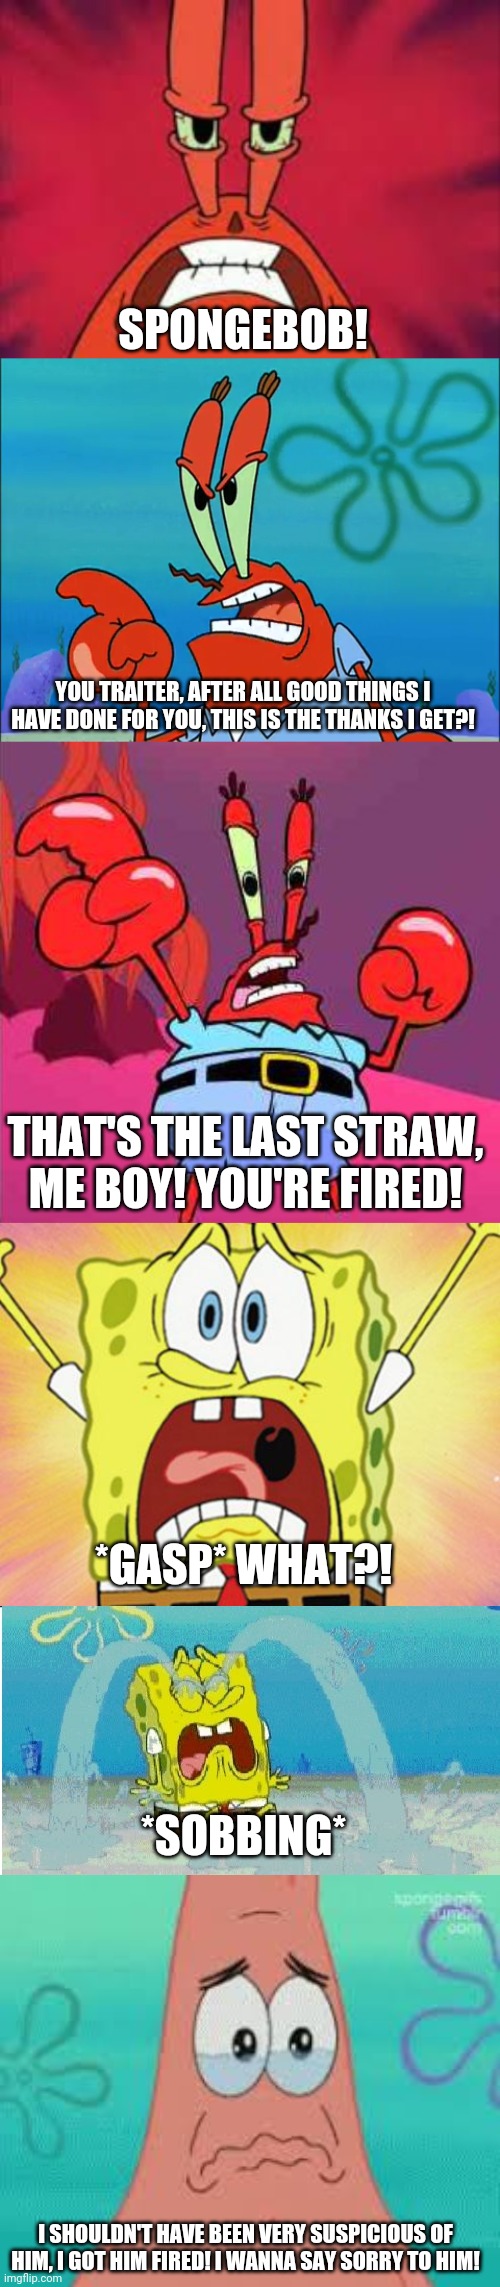 SPONGEBOB! YOU TRAITER, AFTER ALL GOOD THINGS I HAVE DONE FOR YOU, THIS IS THE THANKS I GET?! THAT'S THE LAST STRAW, ME BOY! YOU'RE FIRED! *GASP* WHAT?! *SOBBING*; I SHOULDN'T HAVE BEEN VERY SUSPICIOUS OF HIM, I GOT HIM FIRED! I WANNA SAY SORRY TO HIM! | image tagged in shocked spongebob,spongebob sad happy,sad patrick | made w/ Imgflip meme maker